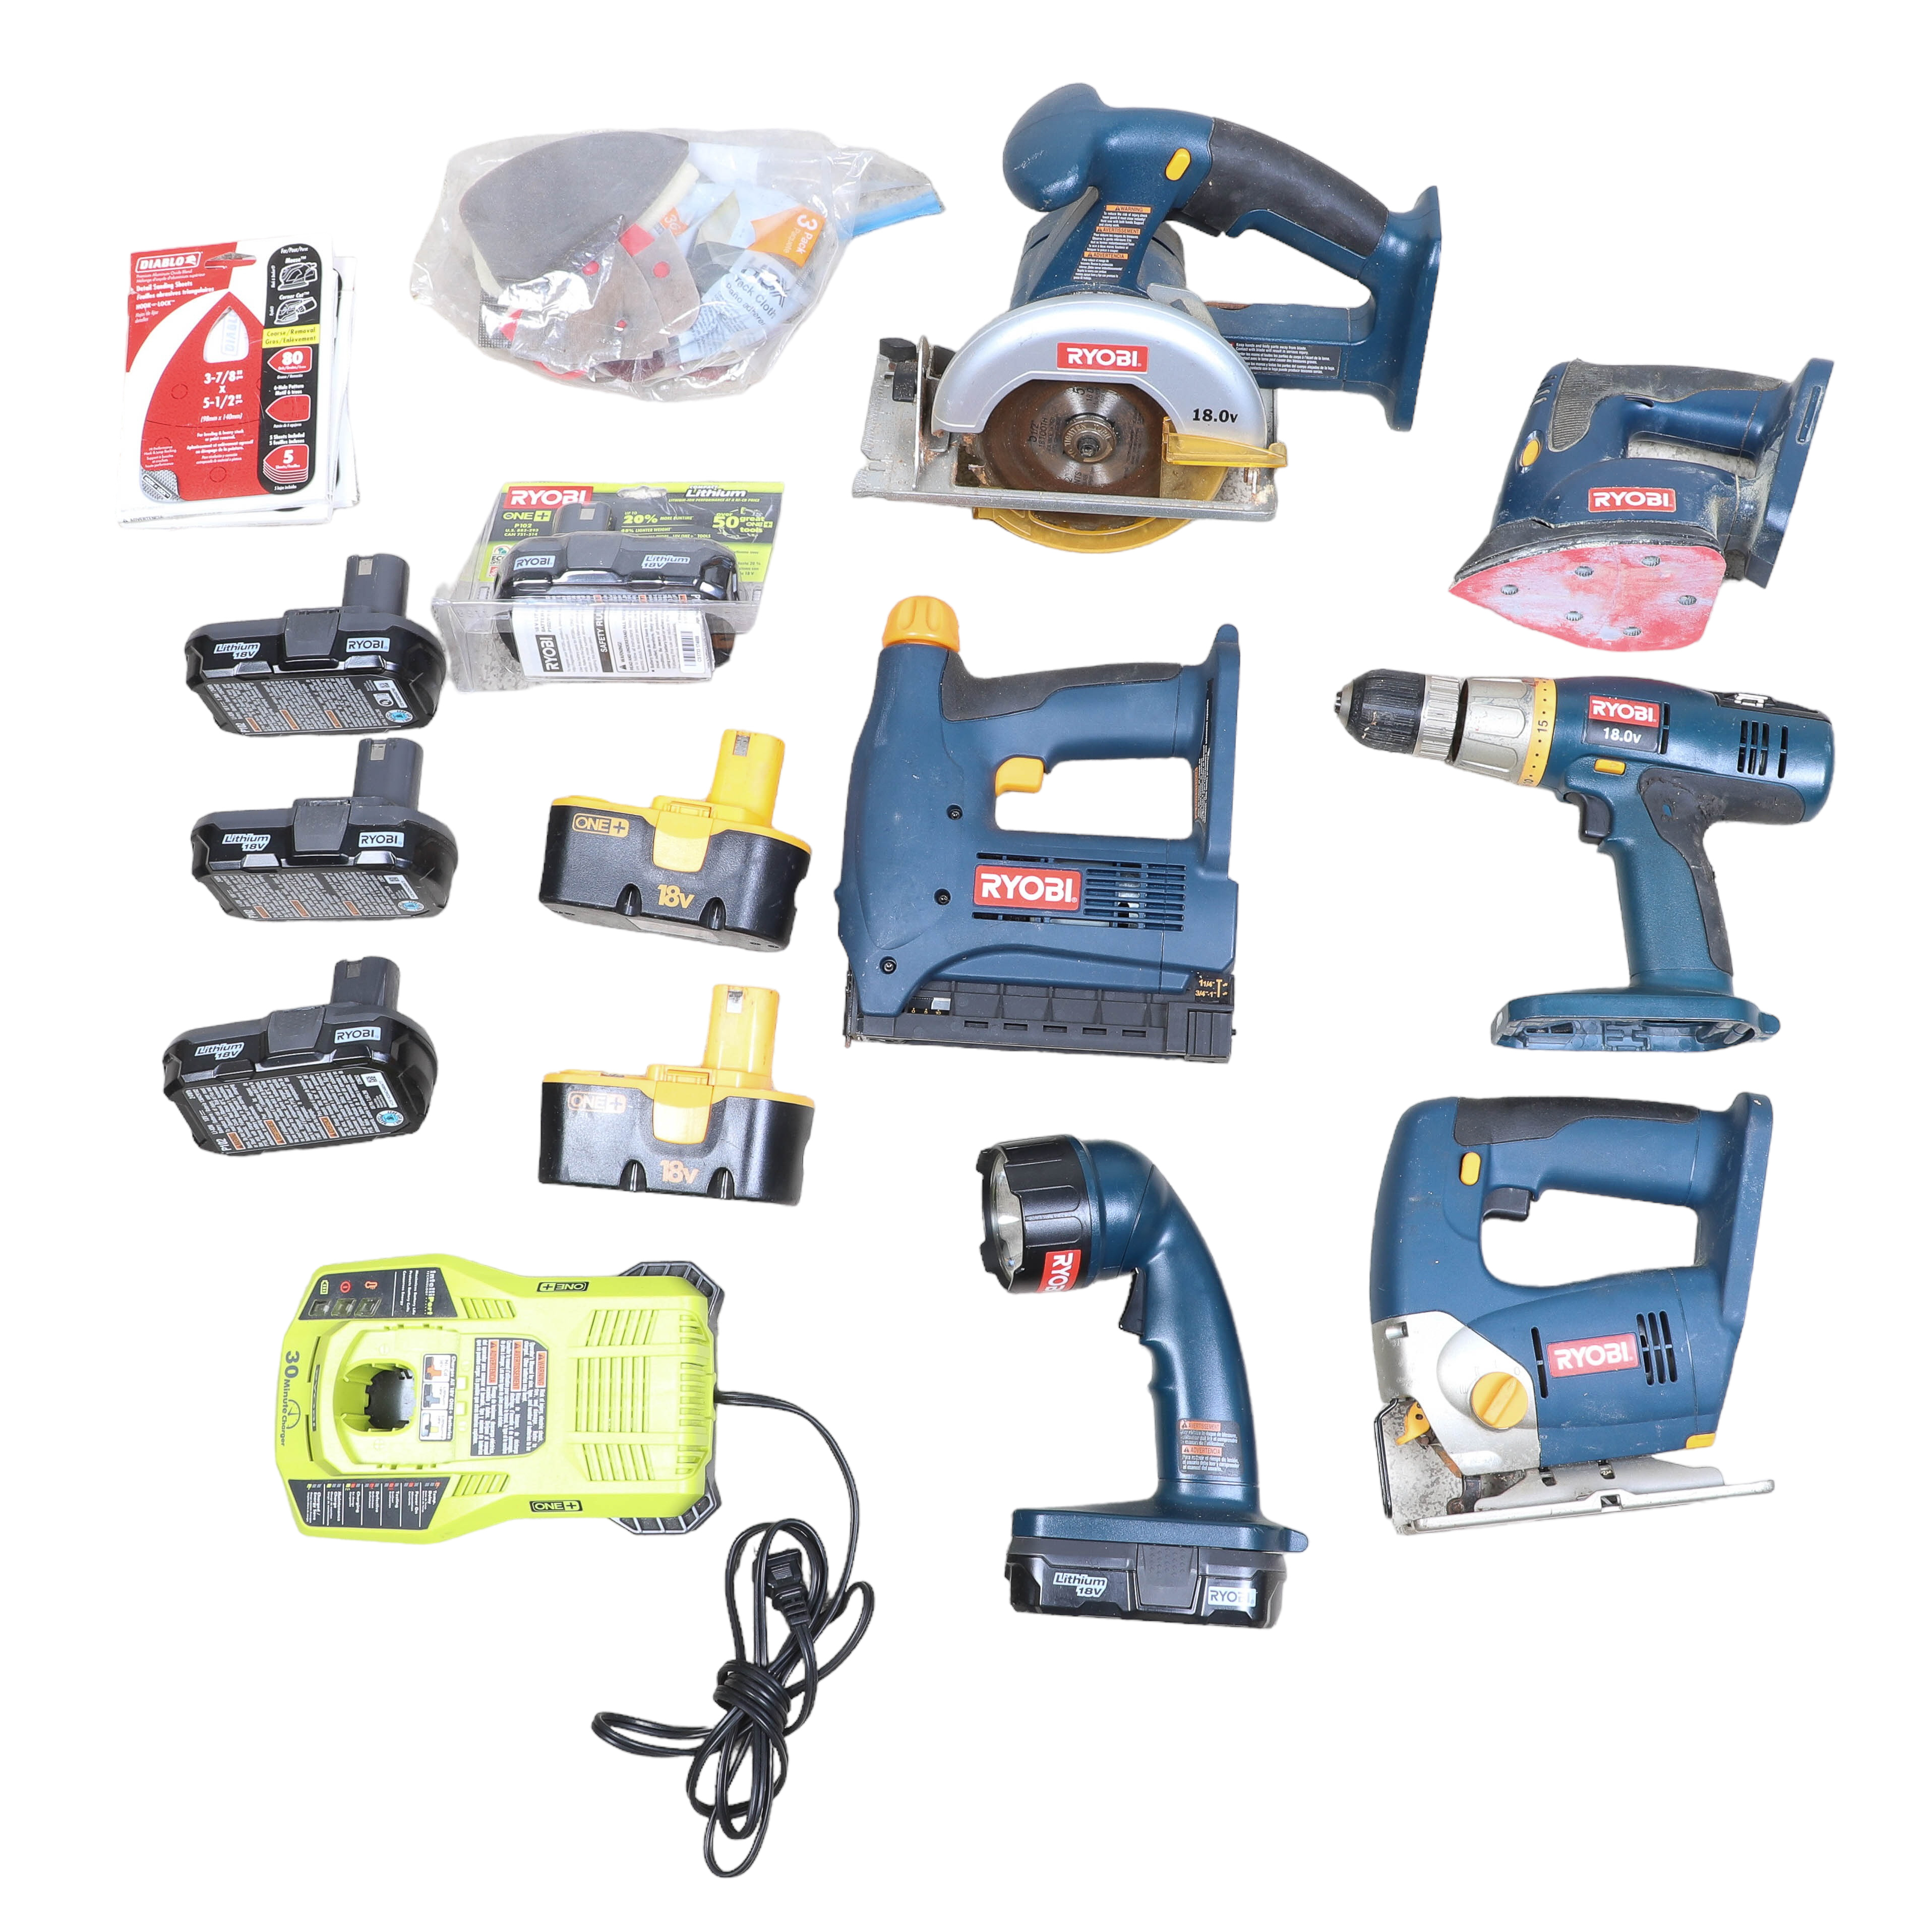 A Large collection of Ryobi tools